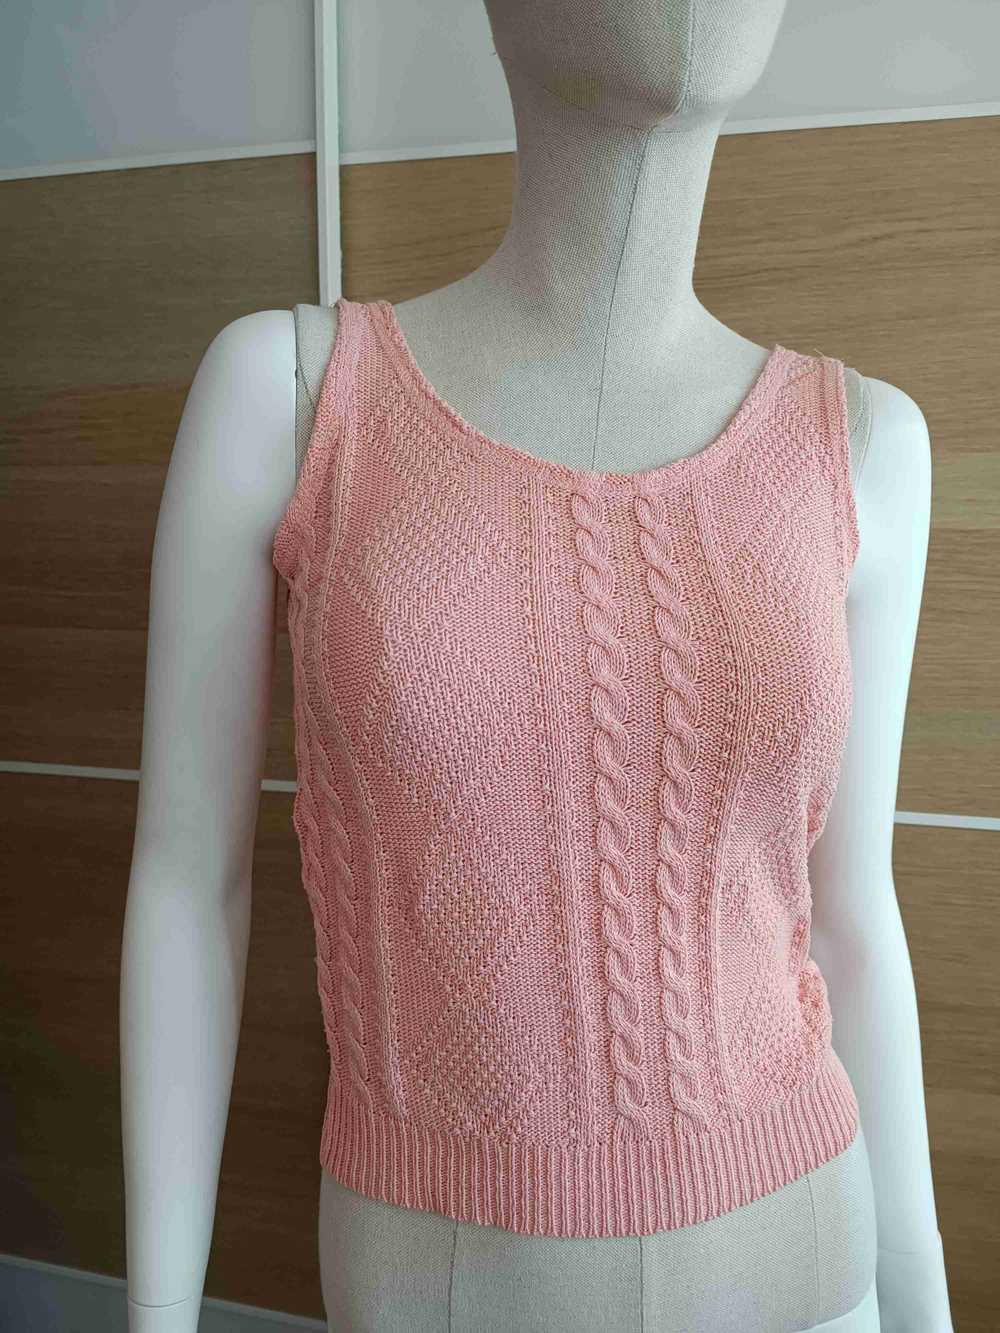 Mesh tank top - Knit tank top Made in France 🇨🇵… - image 4